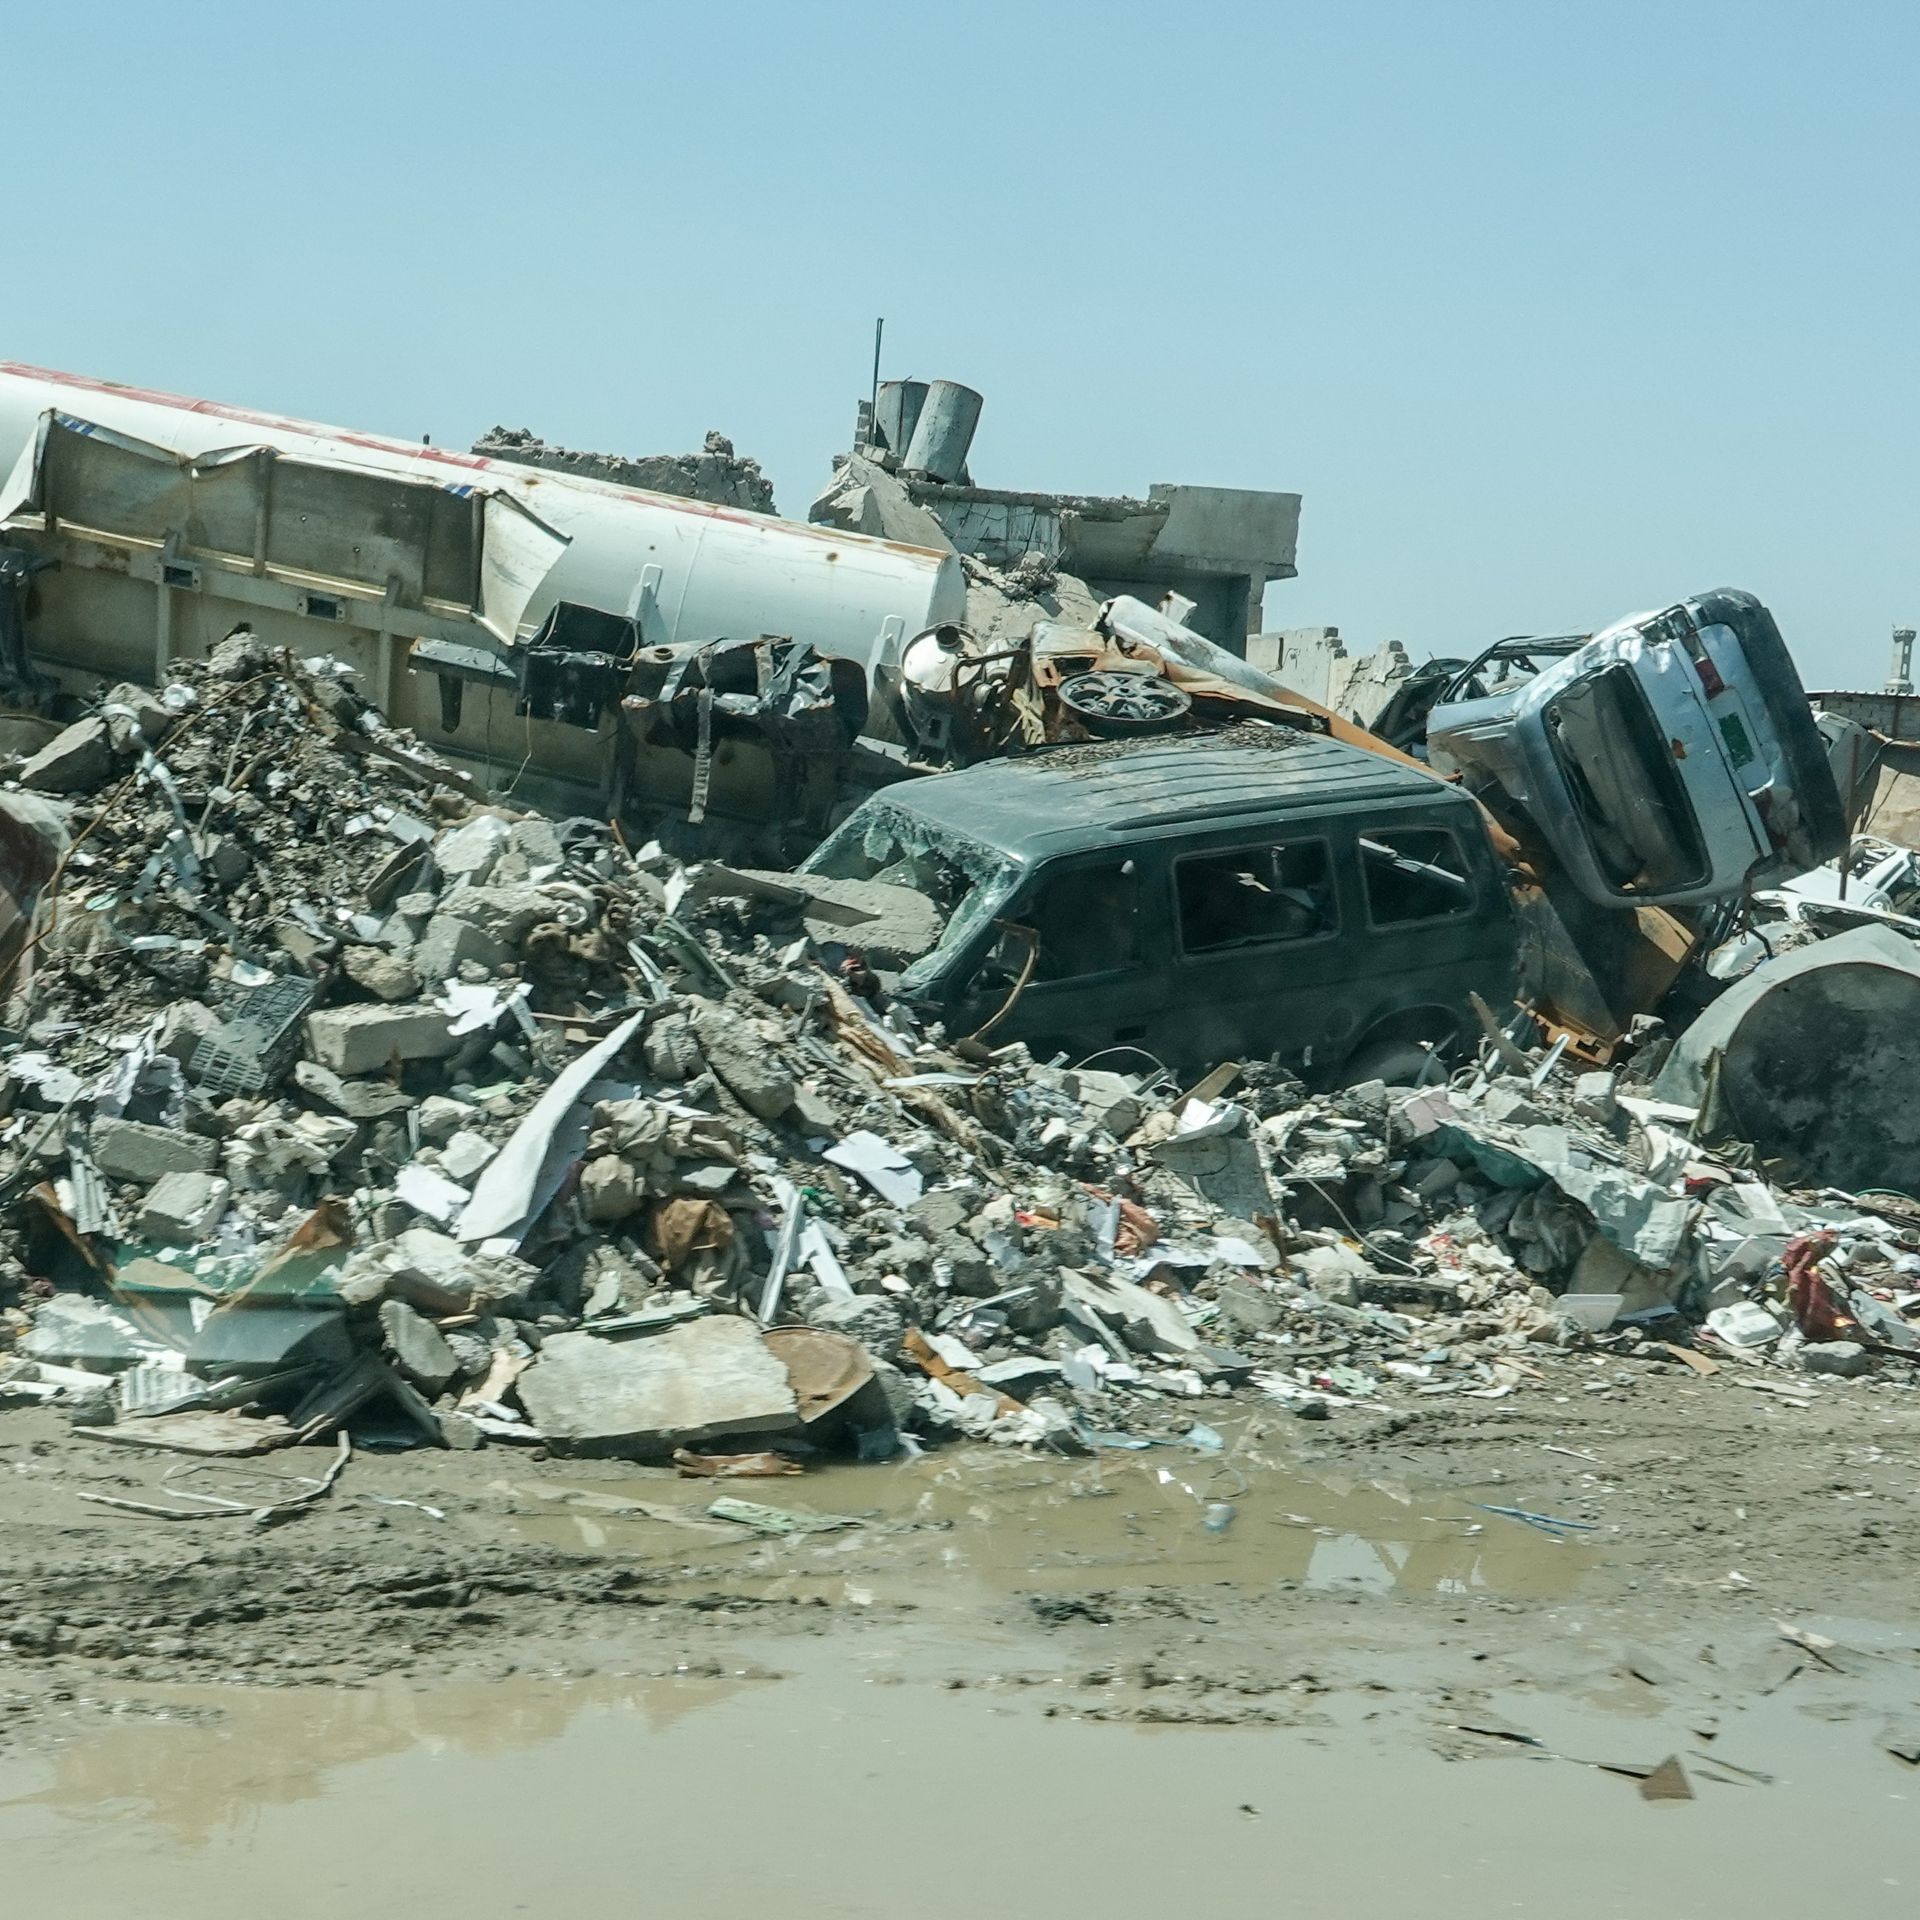  Houses and cars are that were destroyed by the Islamic State litter the city with debris. 